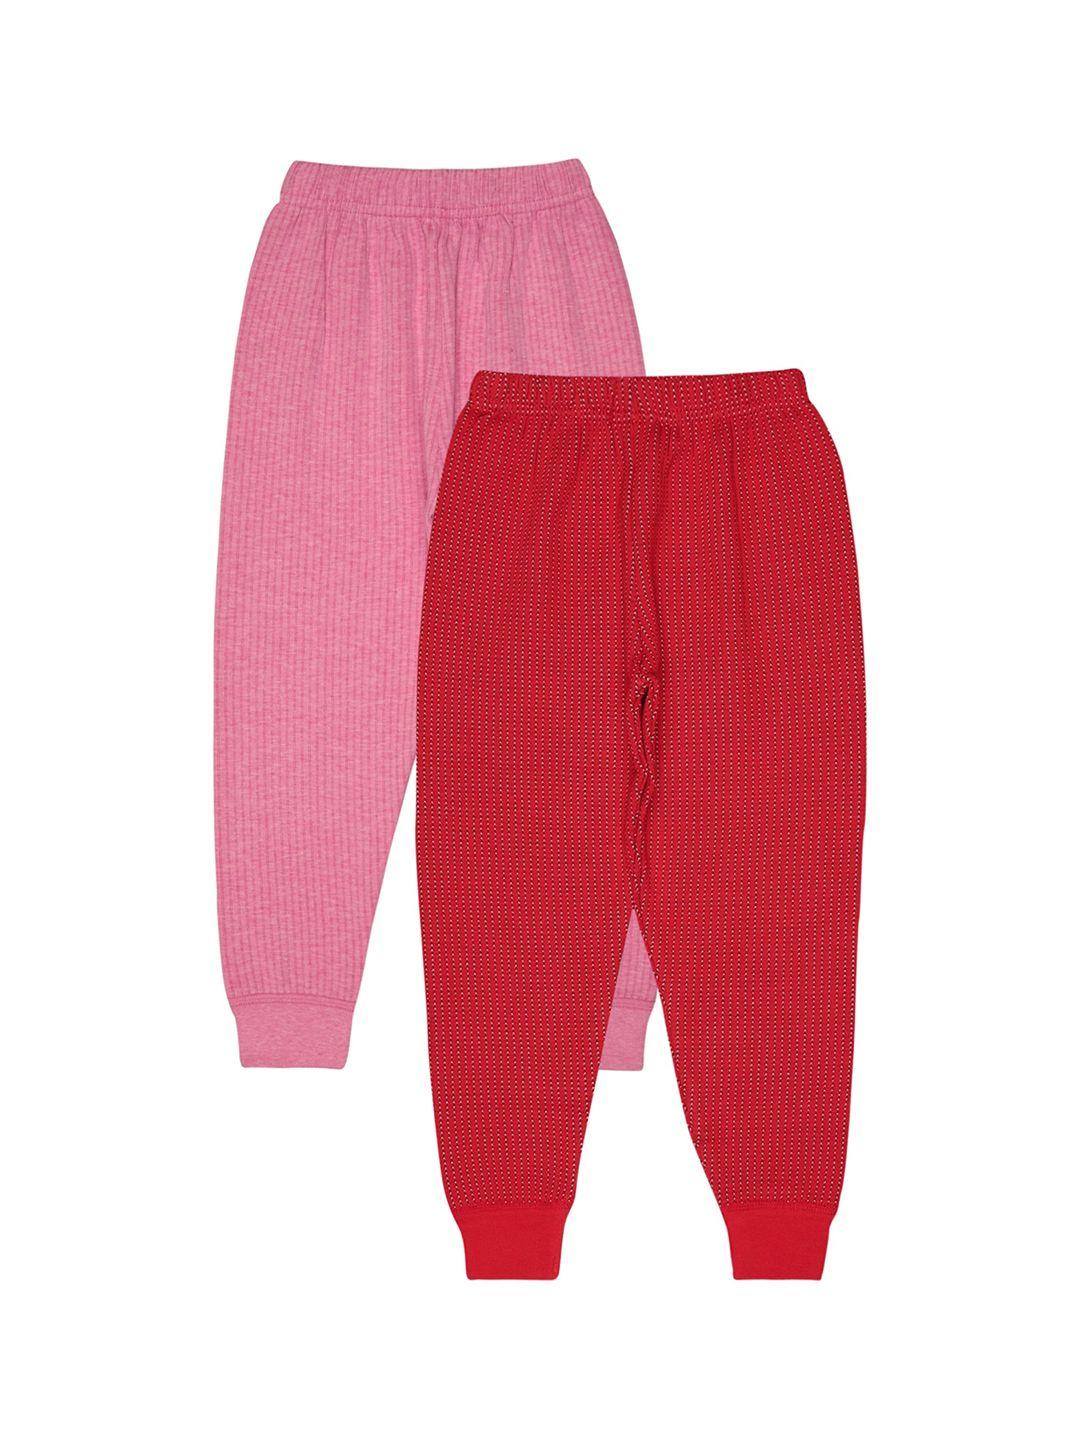 bodycare insider kids pack of 2 printed thermal bottoms